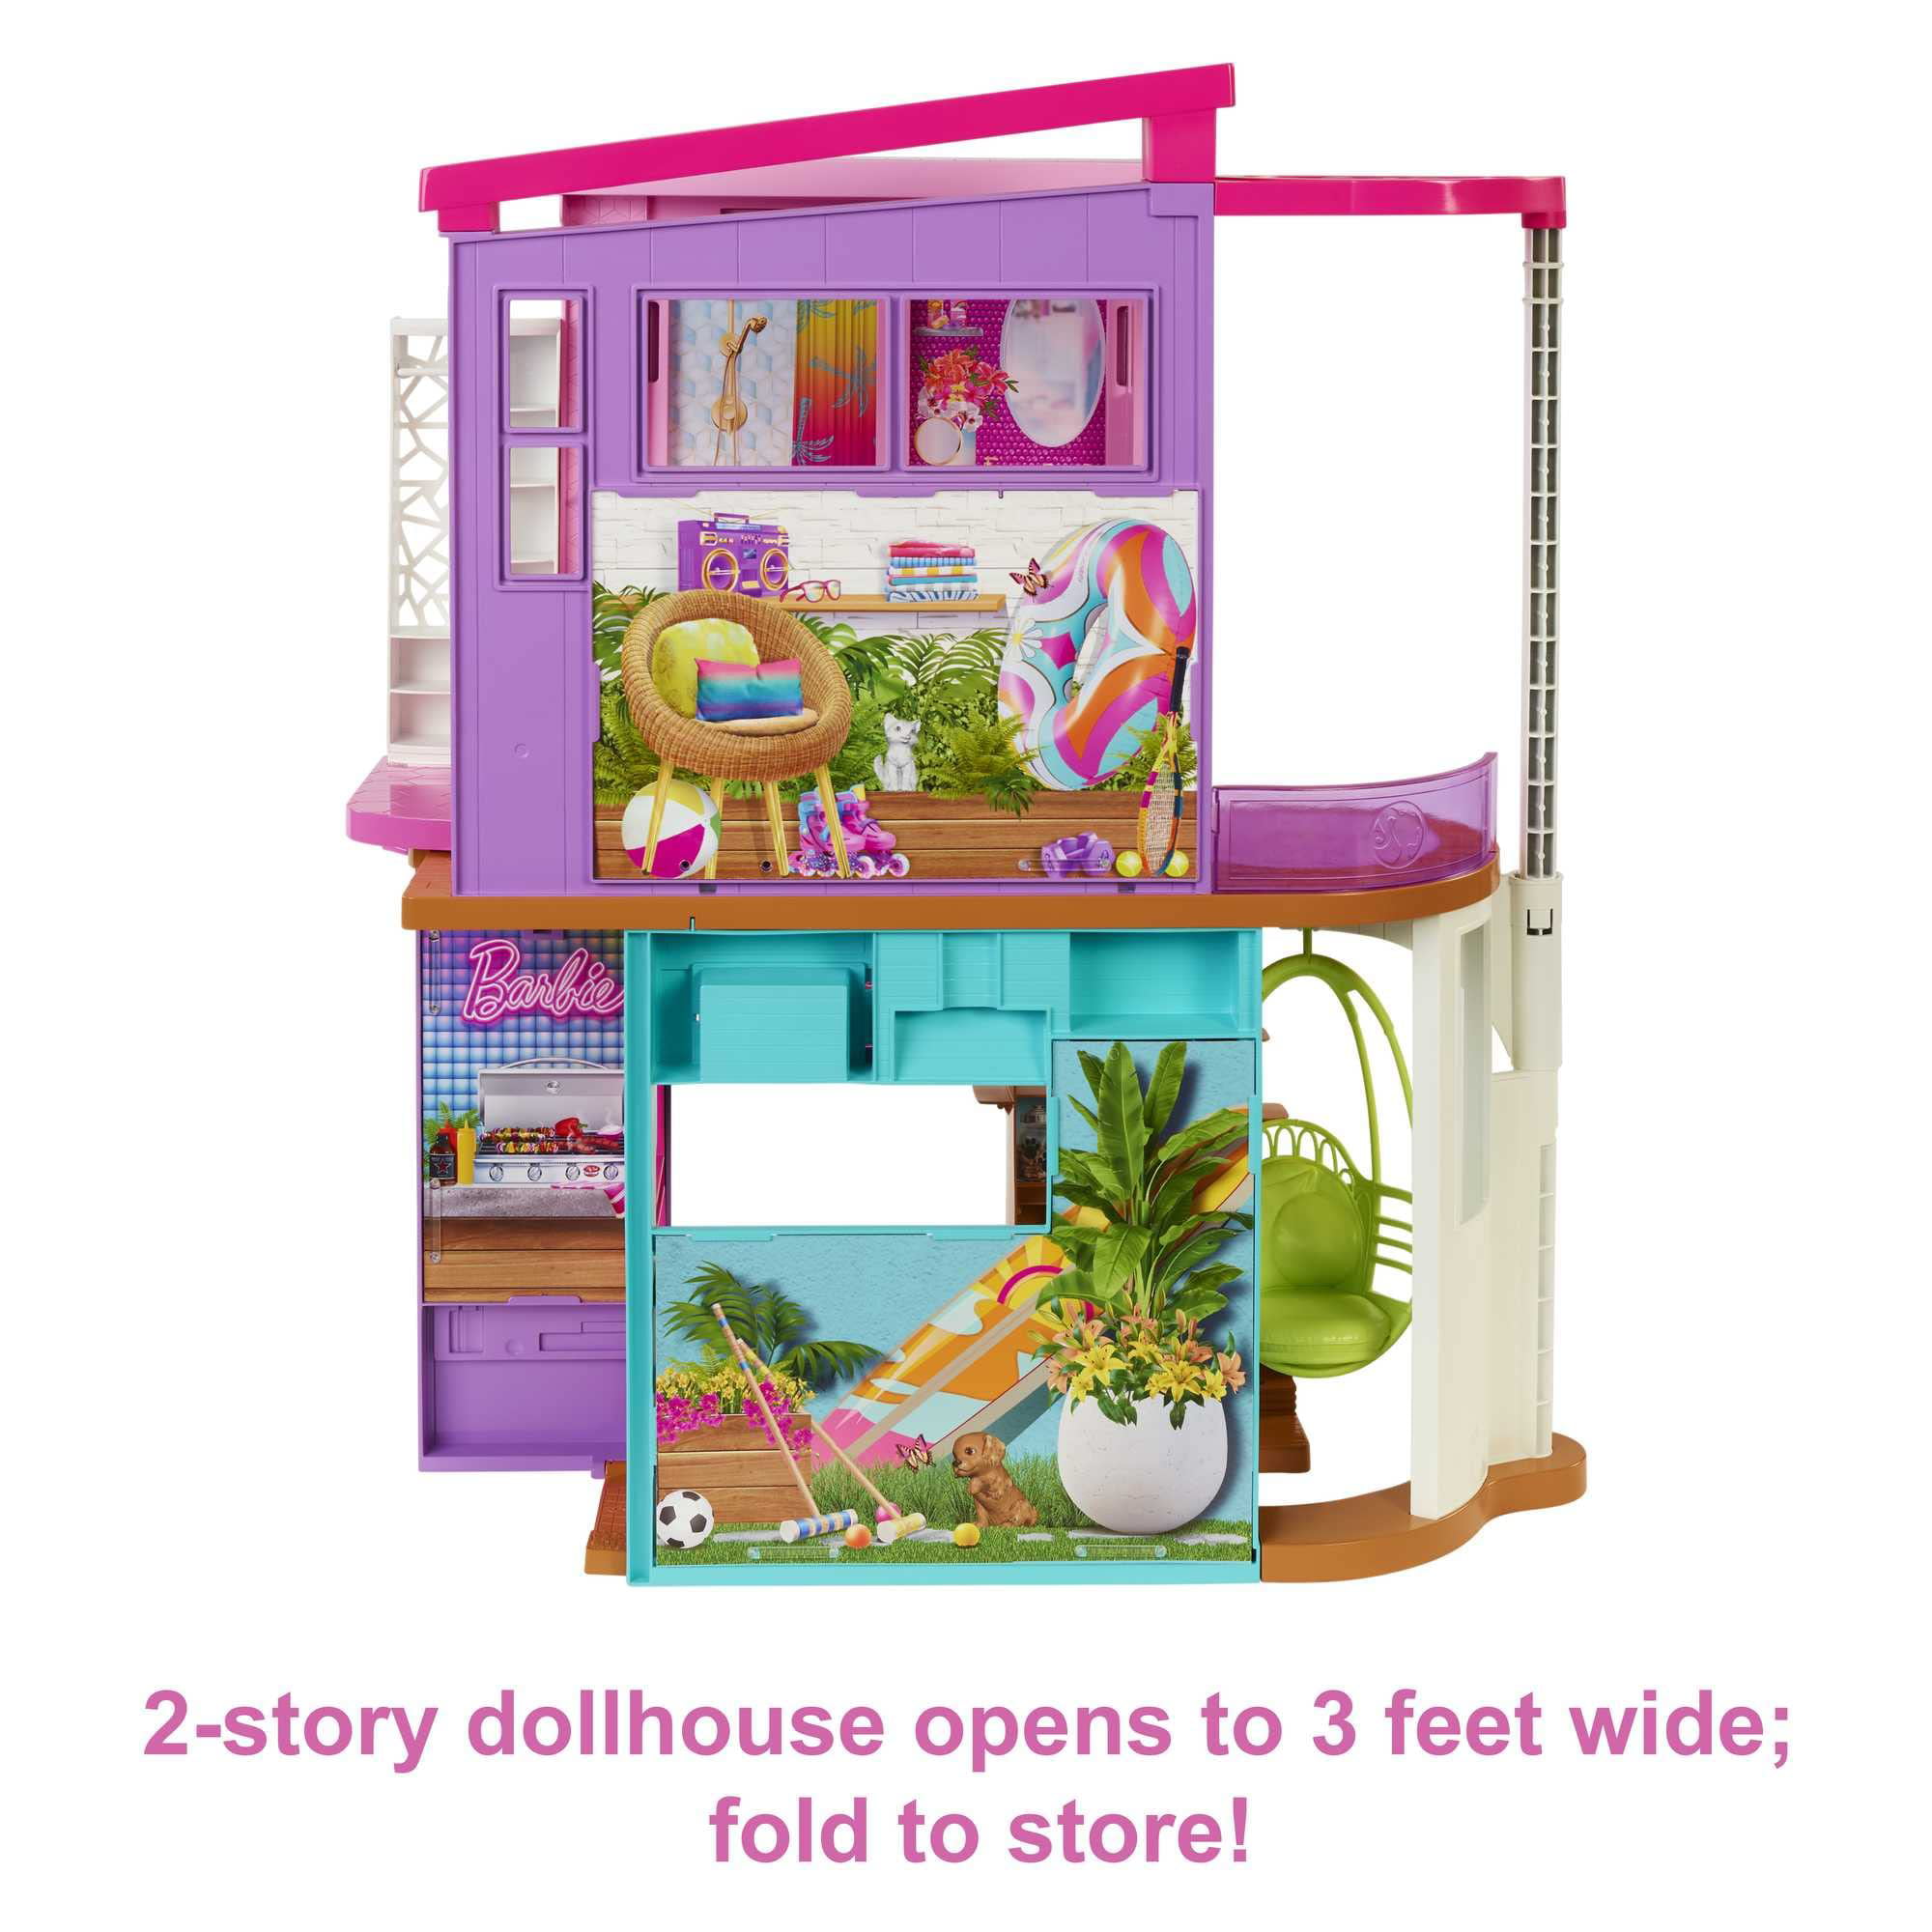 Barbie Vacation House Doll And Playset - The Toy Box Hanover